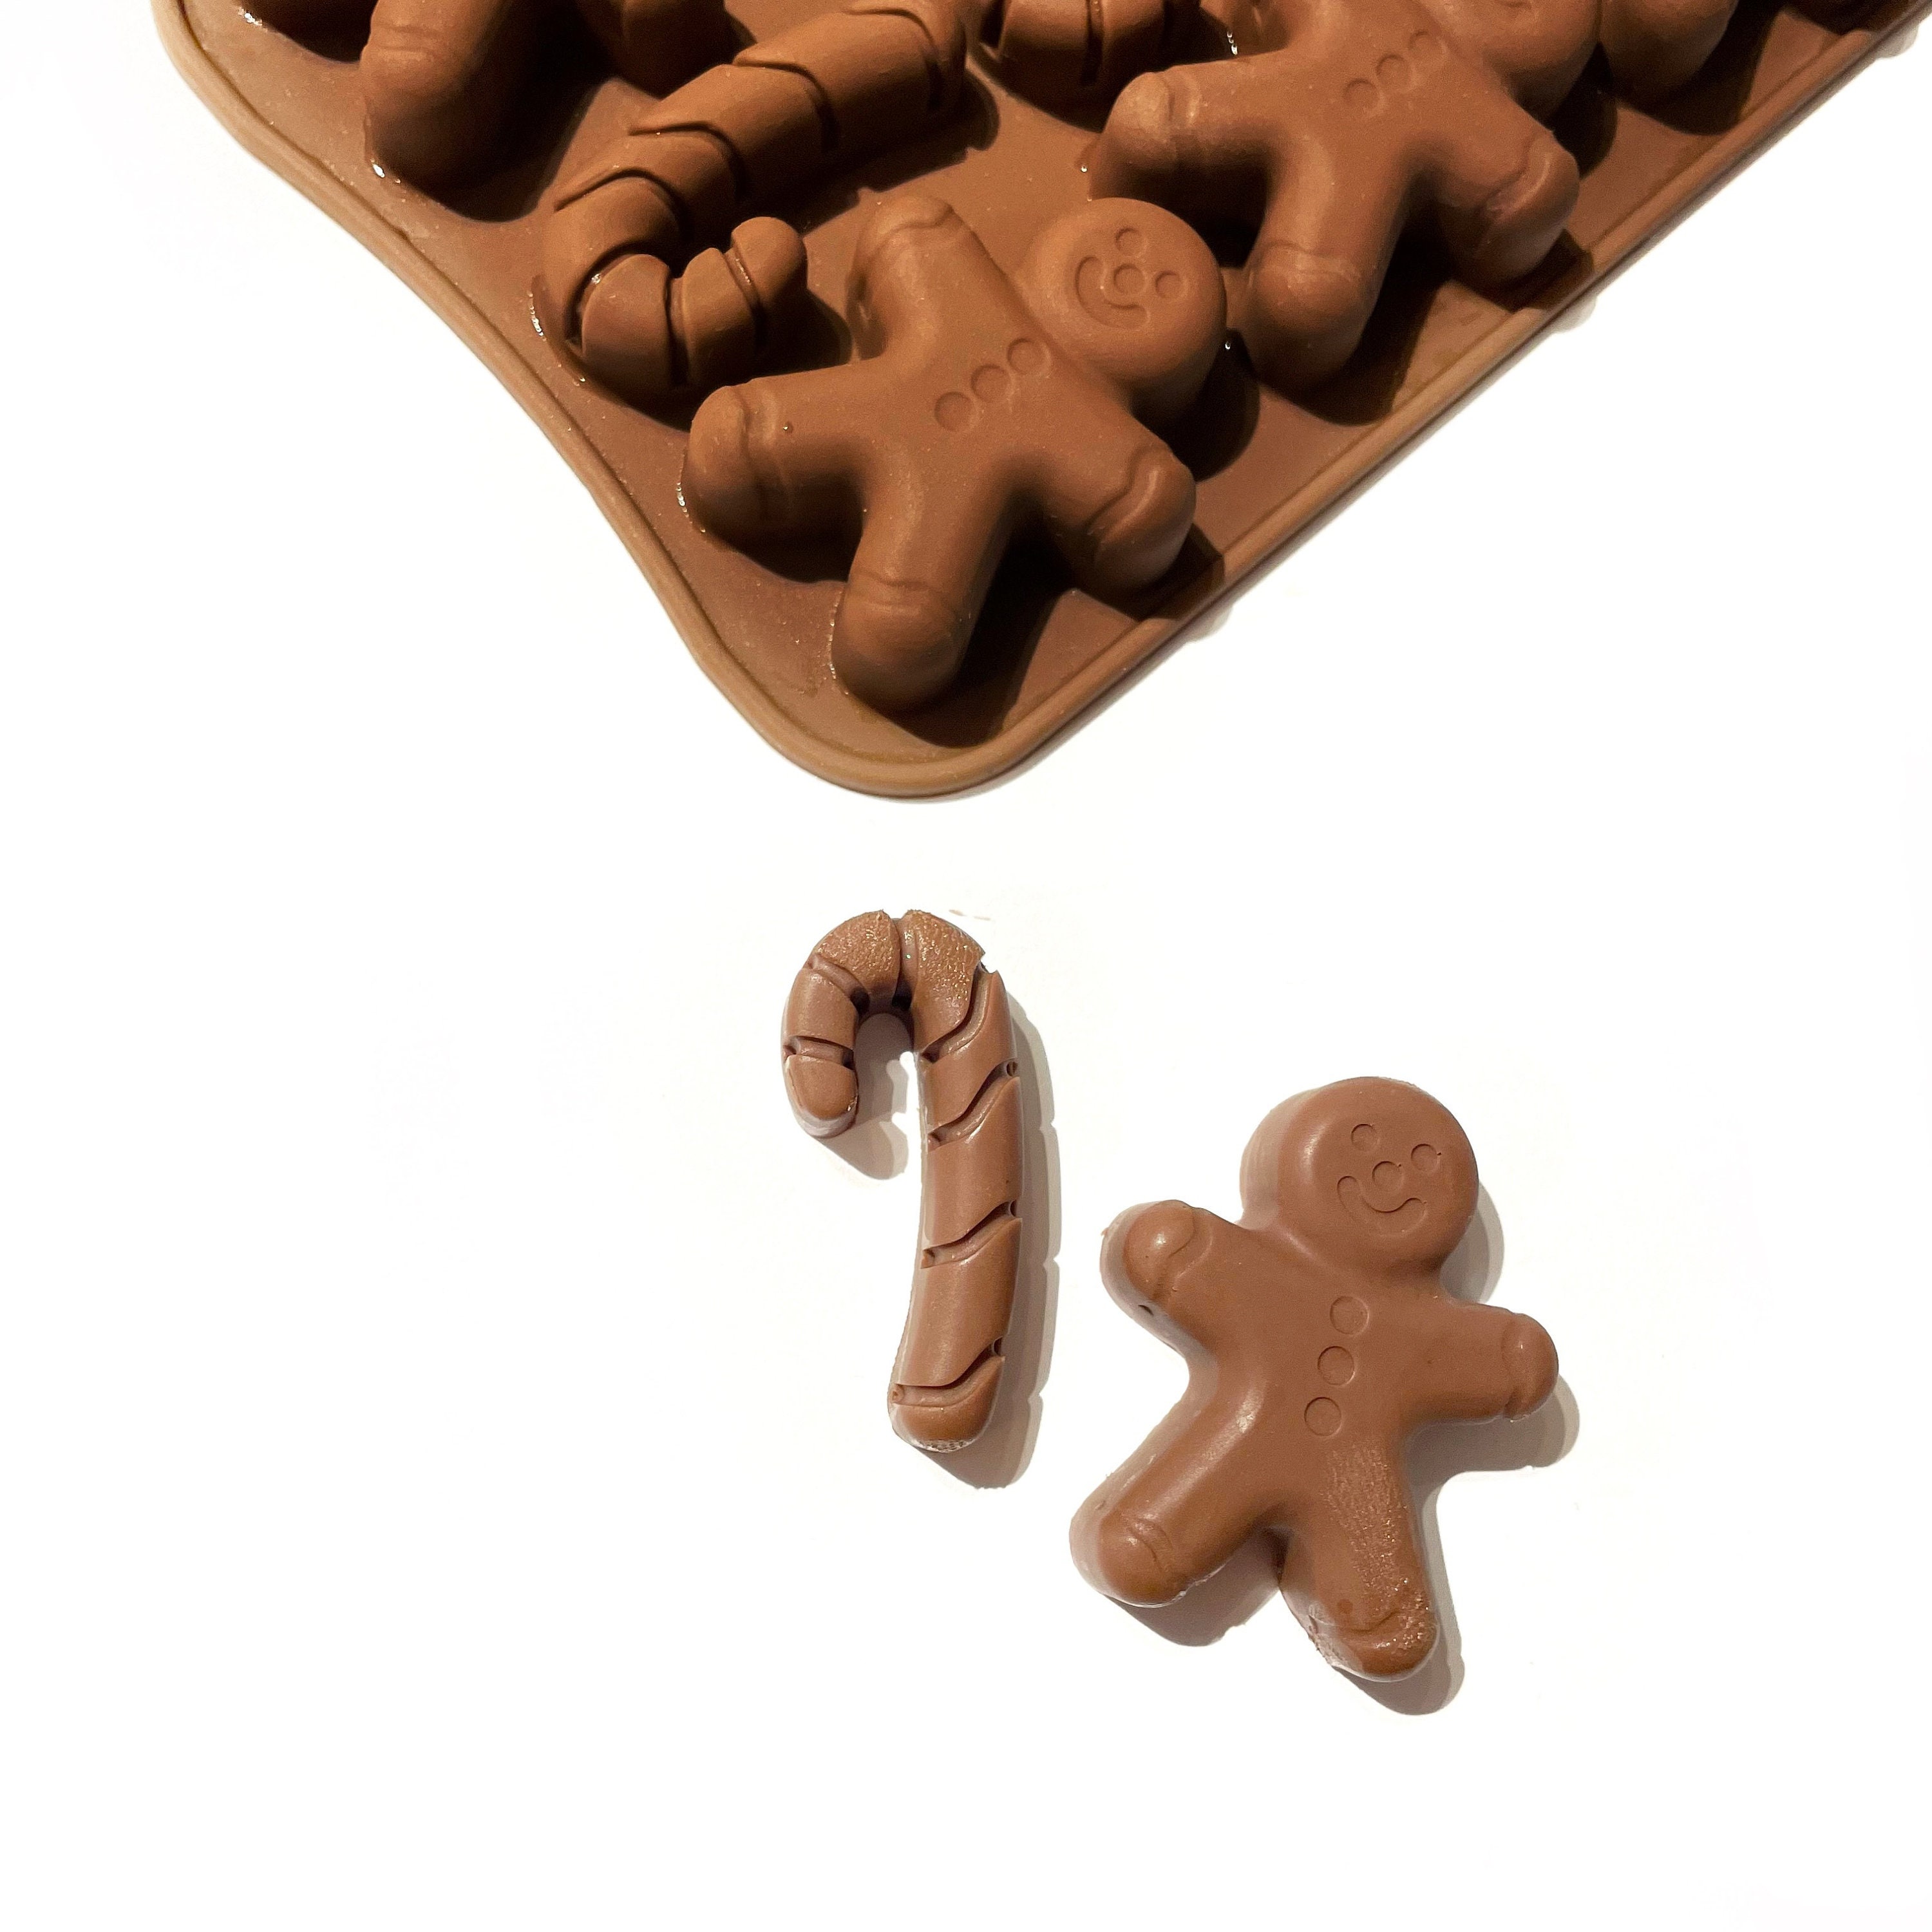 Candy Cane/Gingerbread Man Silicone Chocolate Mold – BeskeBakes